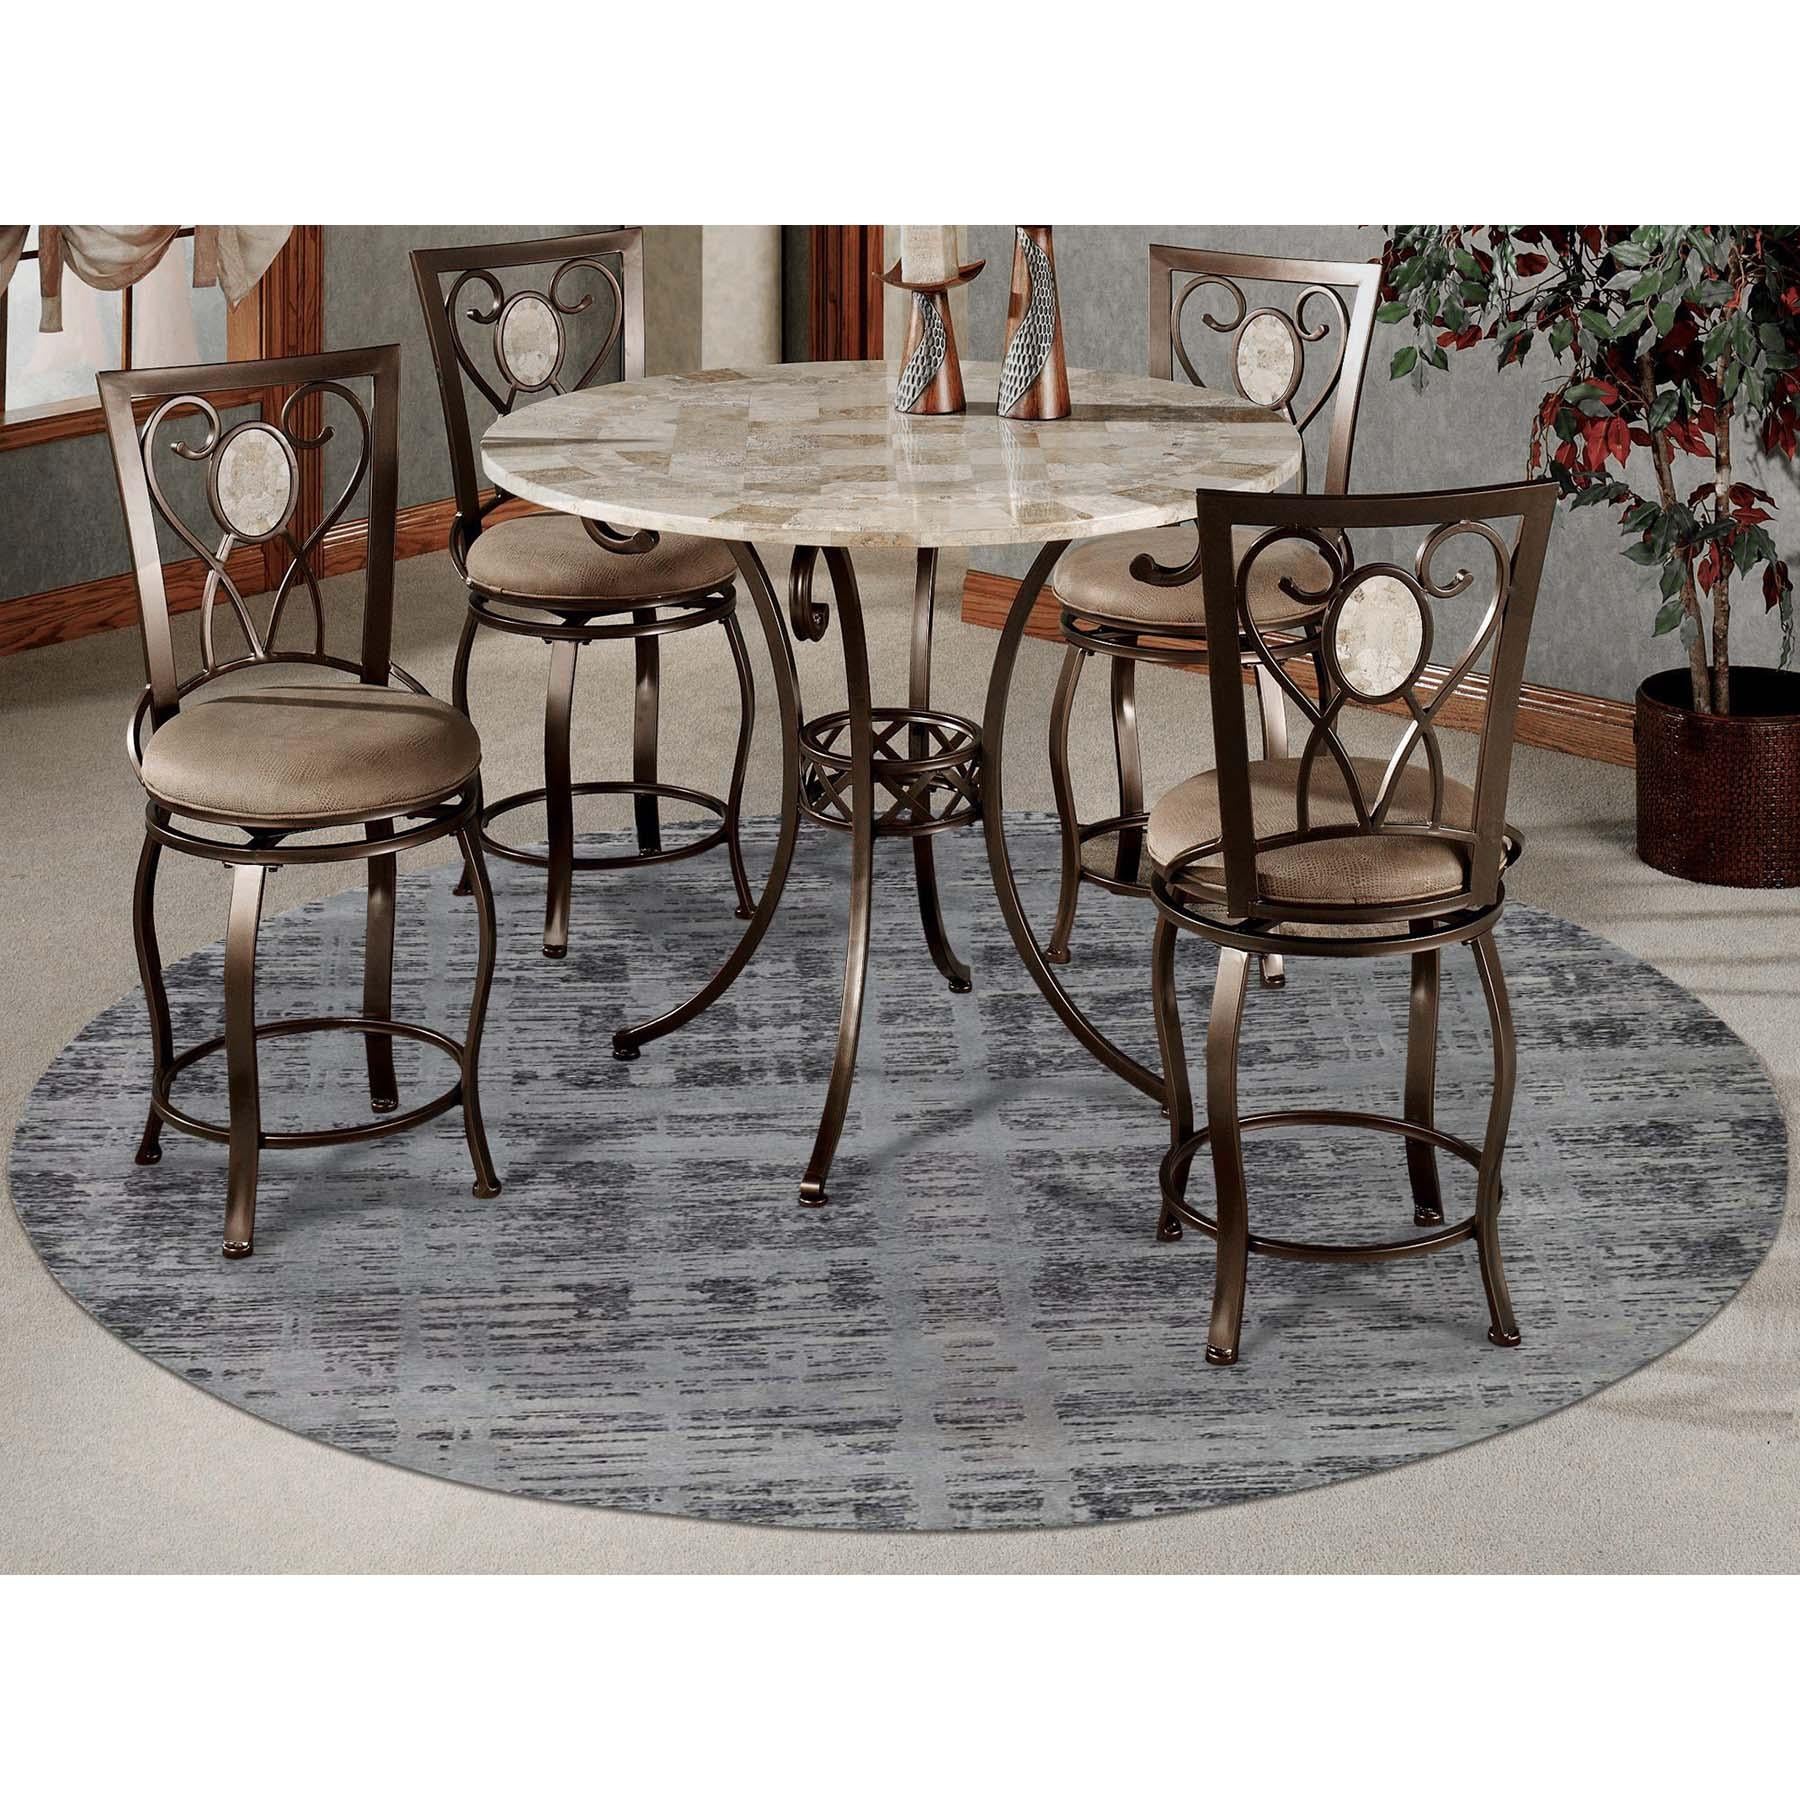 This is a truly genuine one-of-a-kind hand spun undyed natural wool gray modern round hand-knotted rug. It has been knotted for months and months in the centuries-old Persian weaving craftsmanship techniques by expert artisans. Measures: 11'10